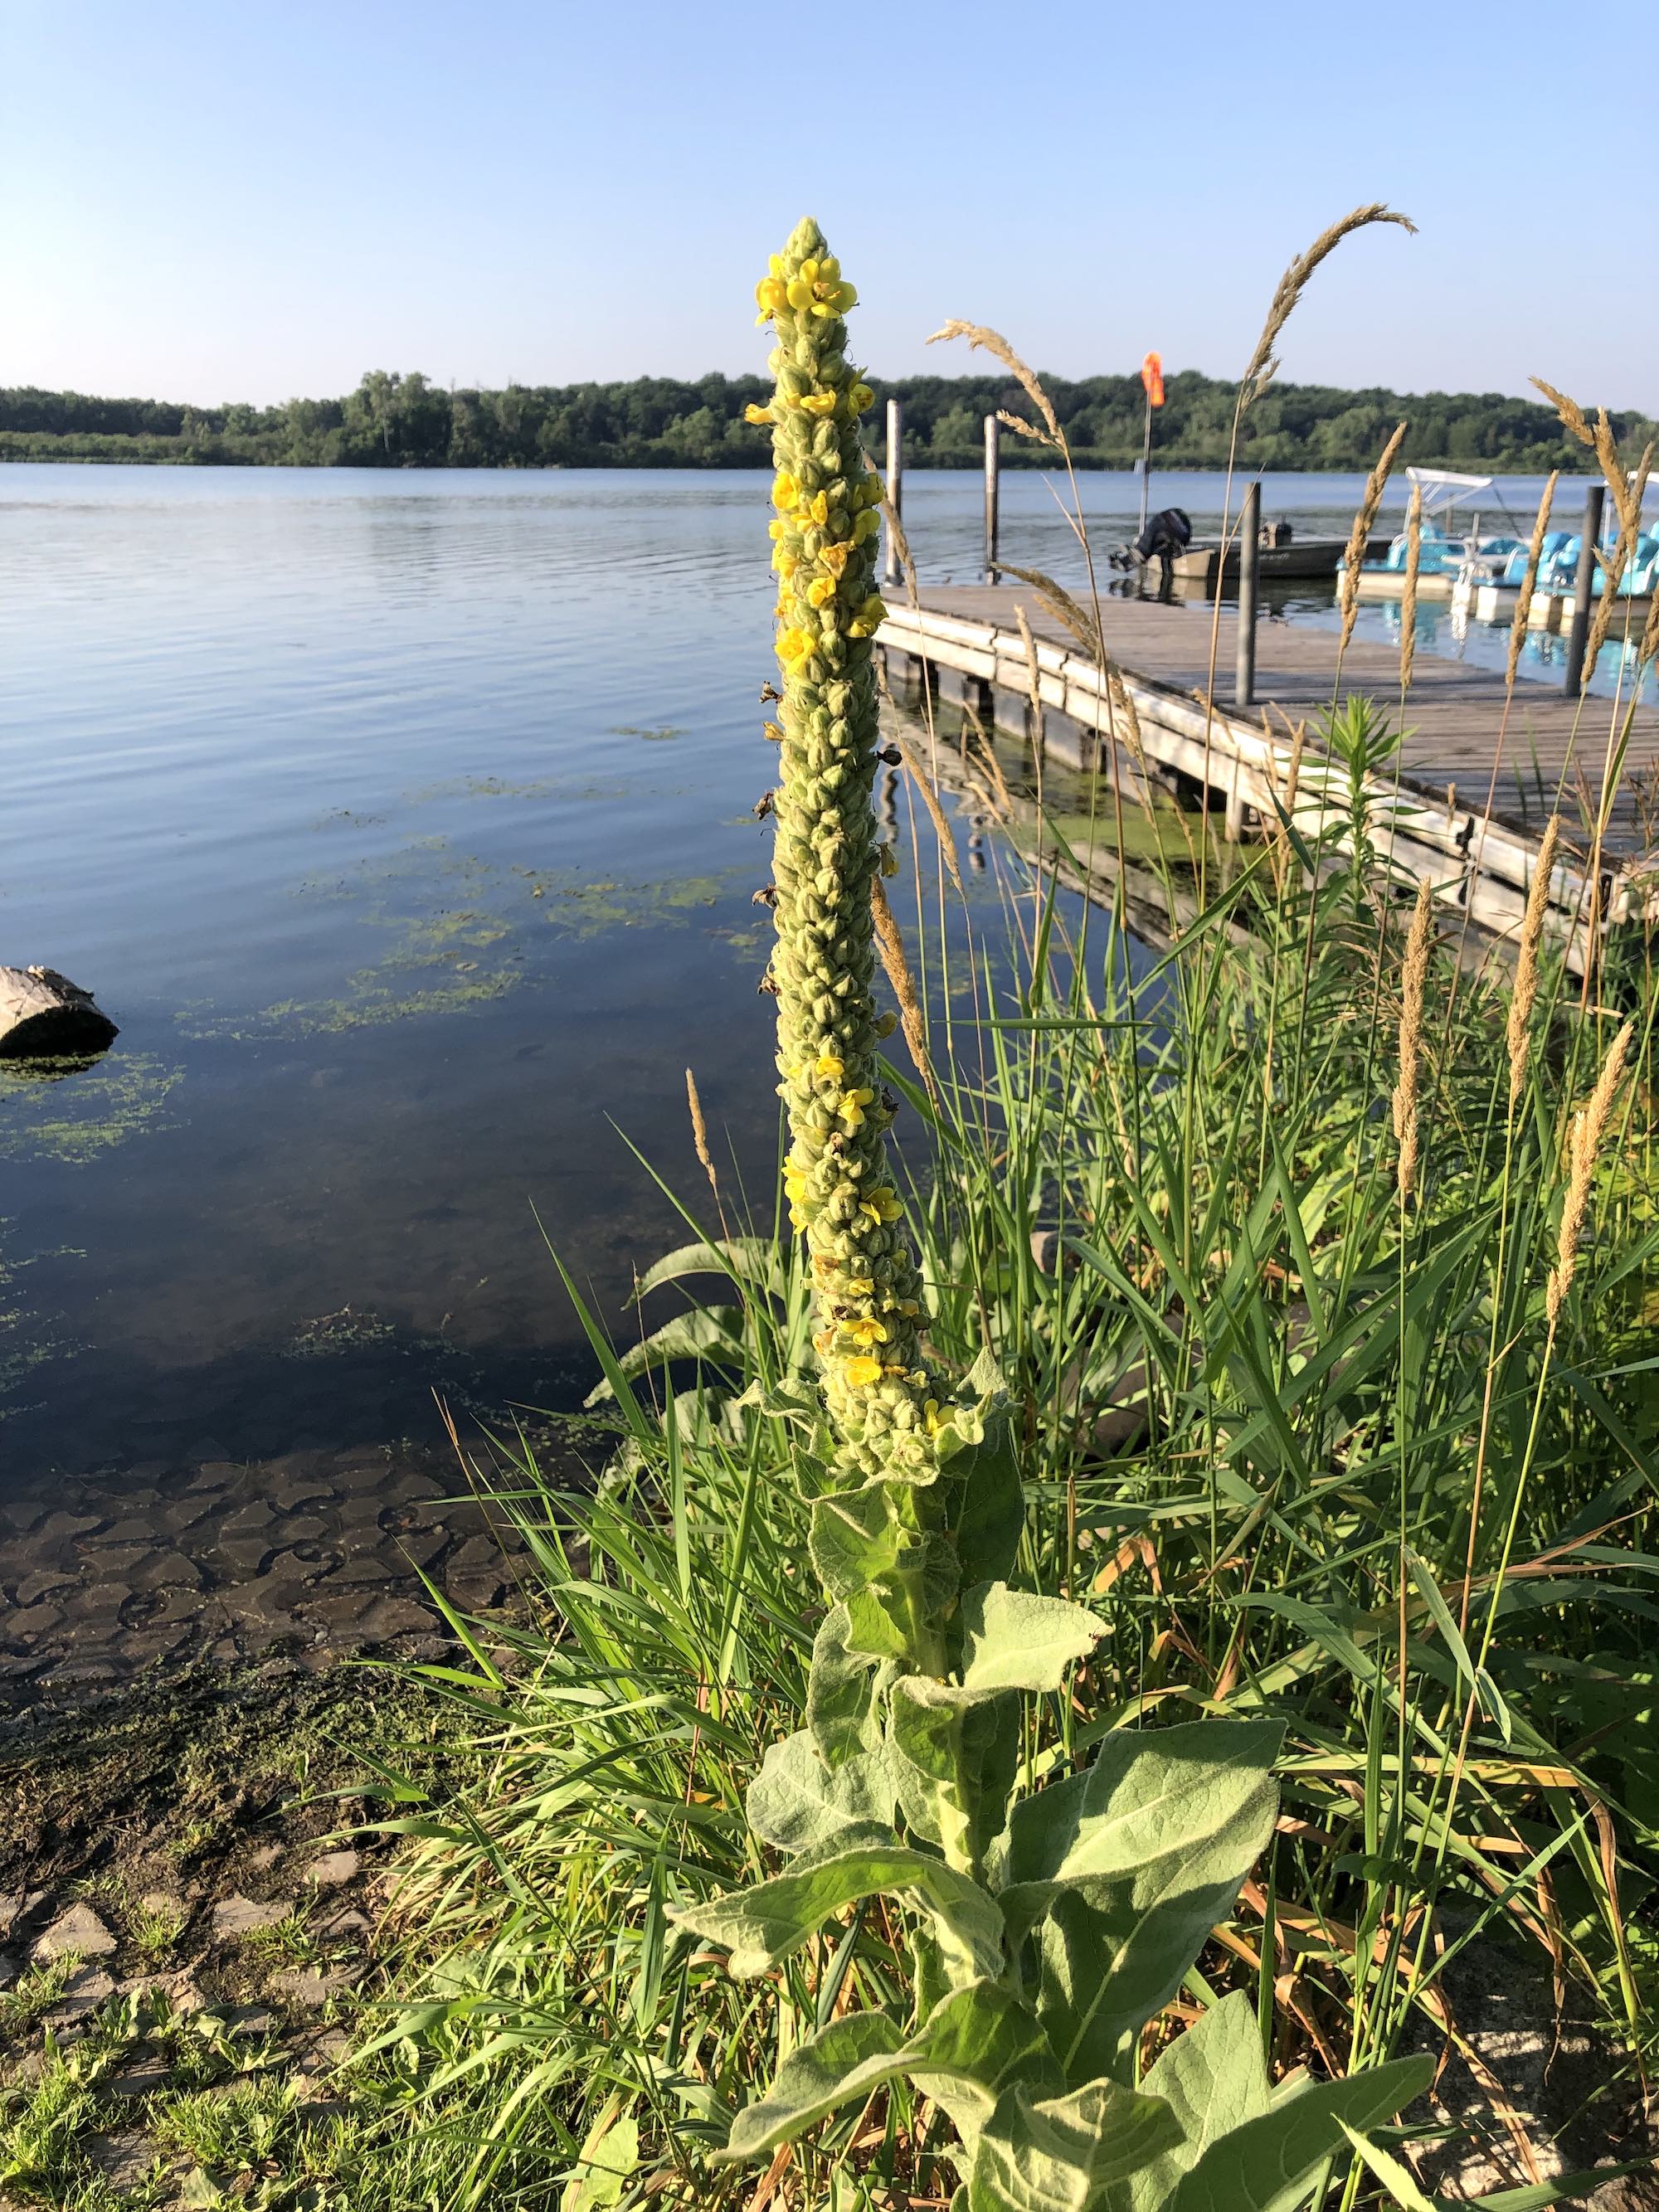 Common Mullein on shore of Lake Wingra in Wingra Park on July 1, 2021.